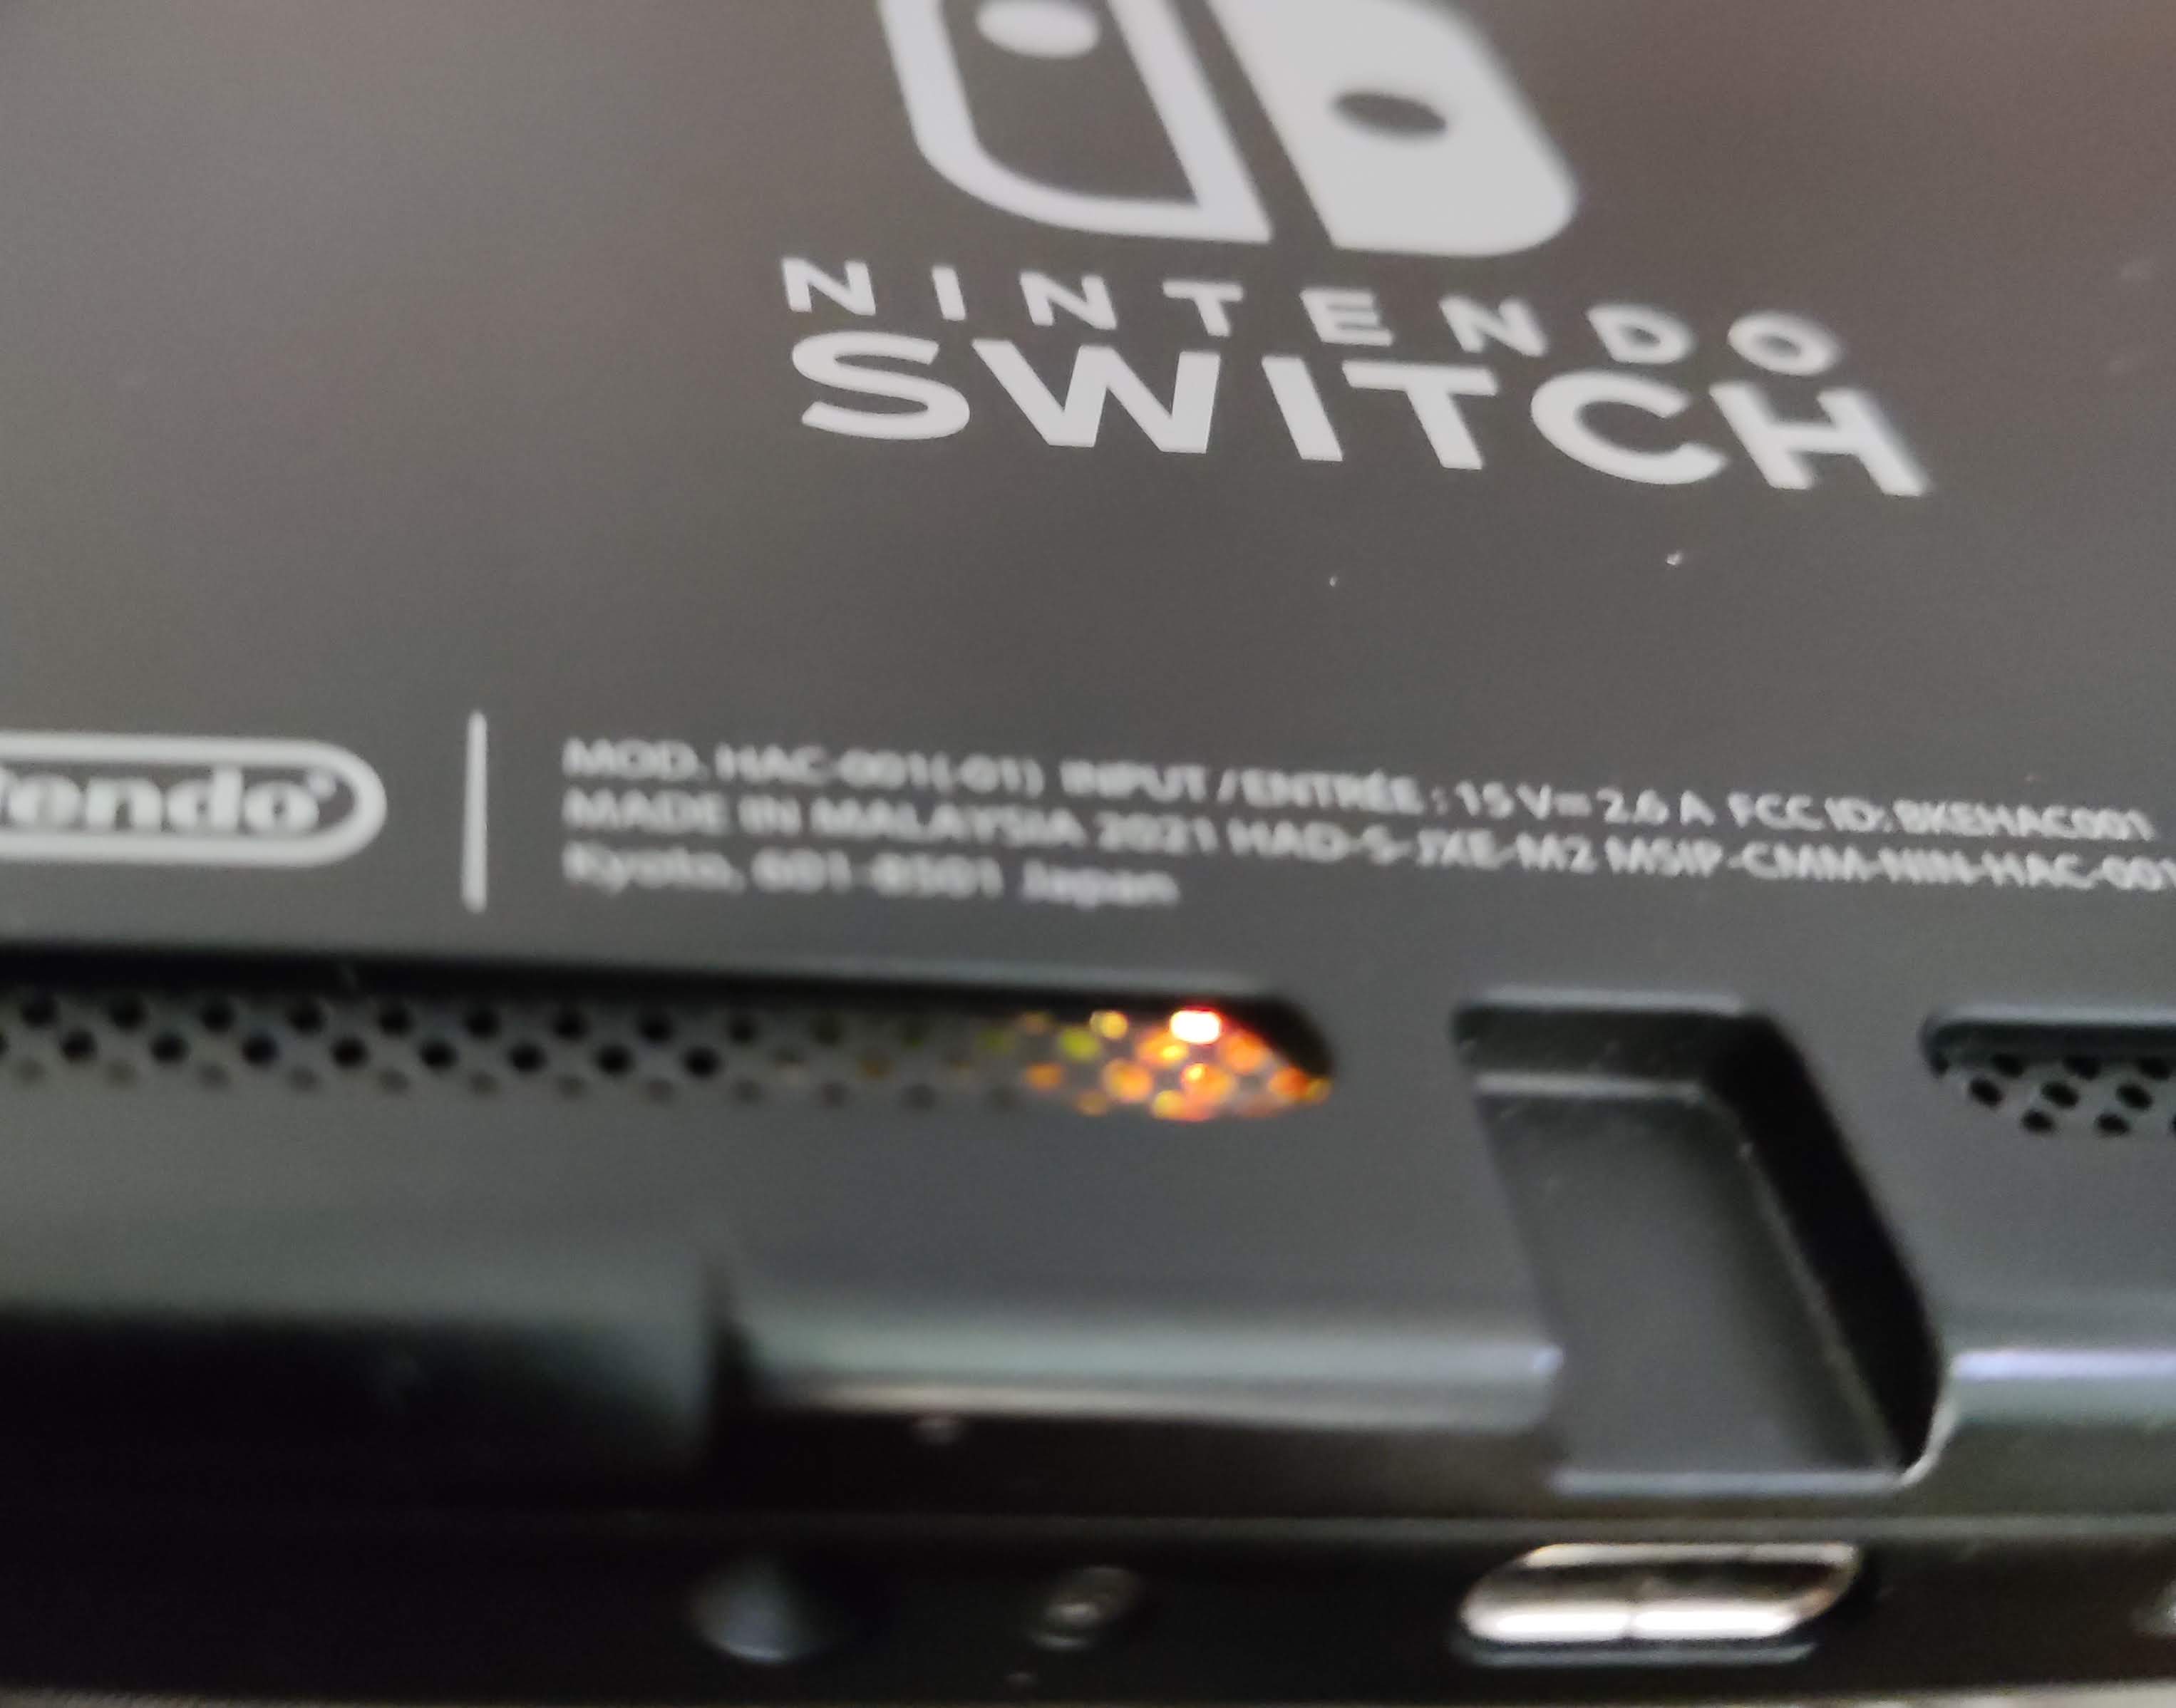 help my switch with hwfly boot ofw and has an orange led | GBAtemp.net -  The Independent Video Game Community